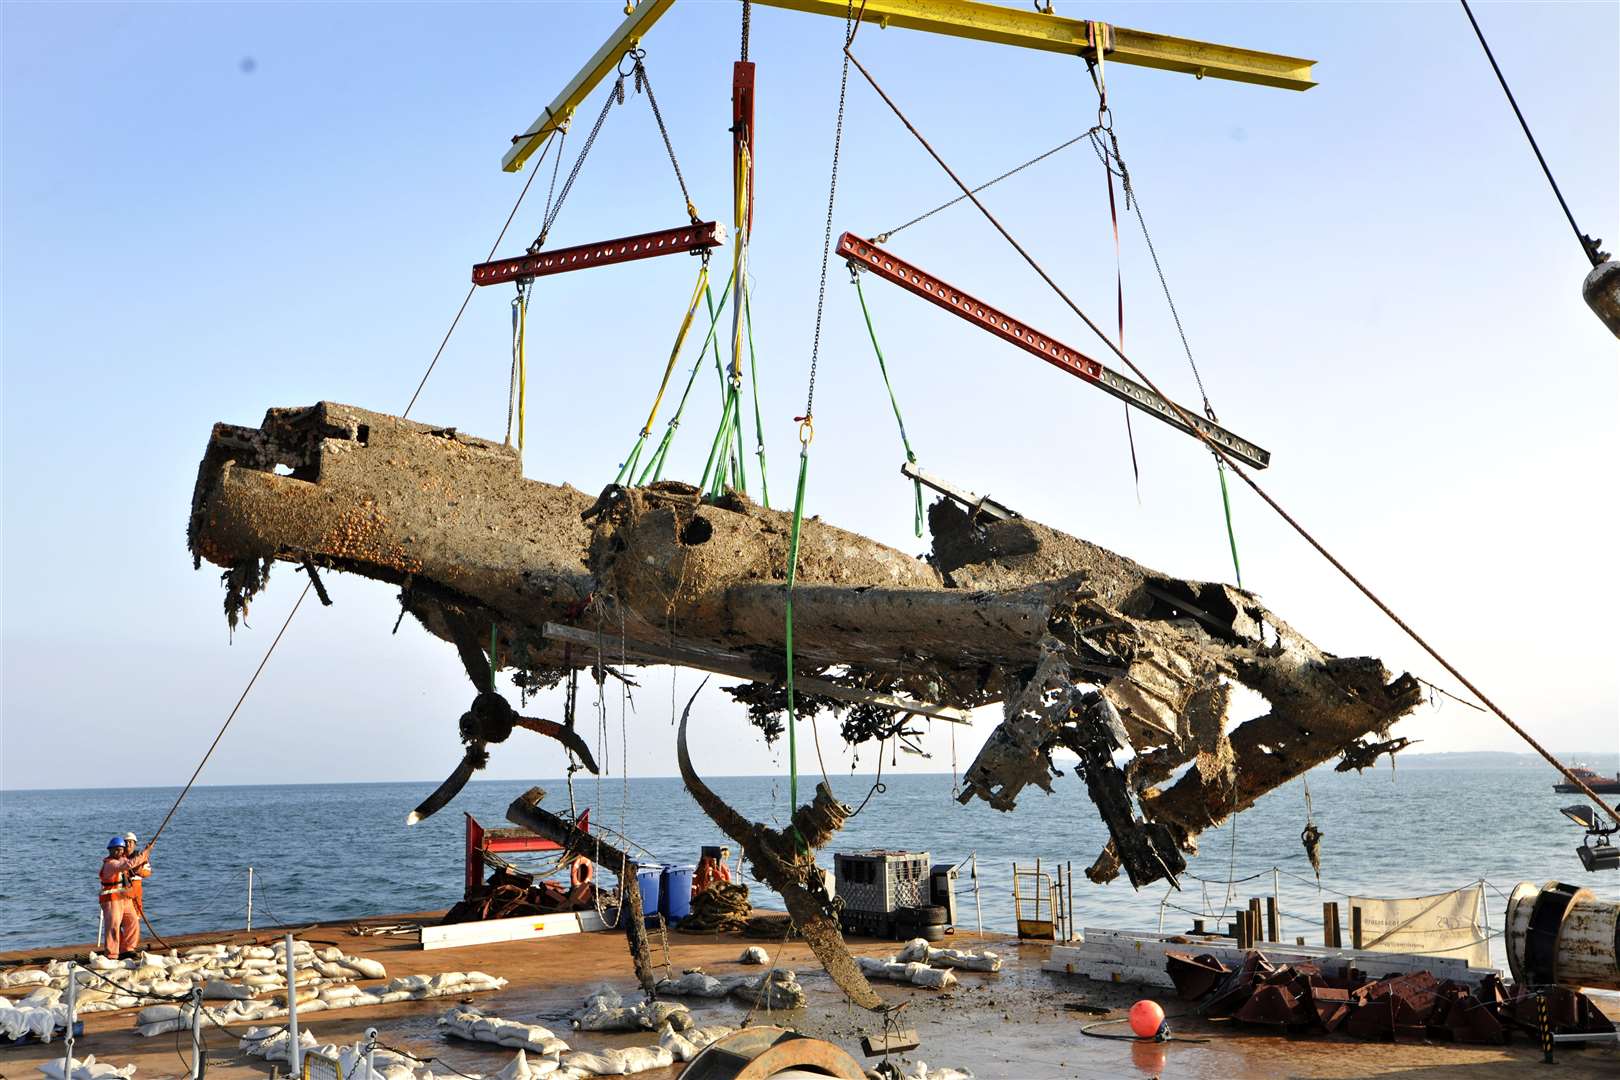 A Dornier 17 was recovered from the waters in 2013. Picture: Trustees of the Royal Air Force Museum